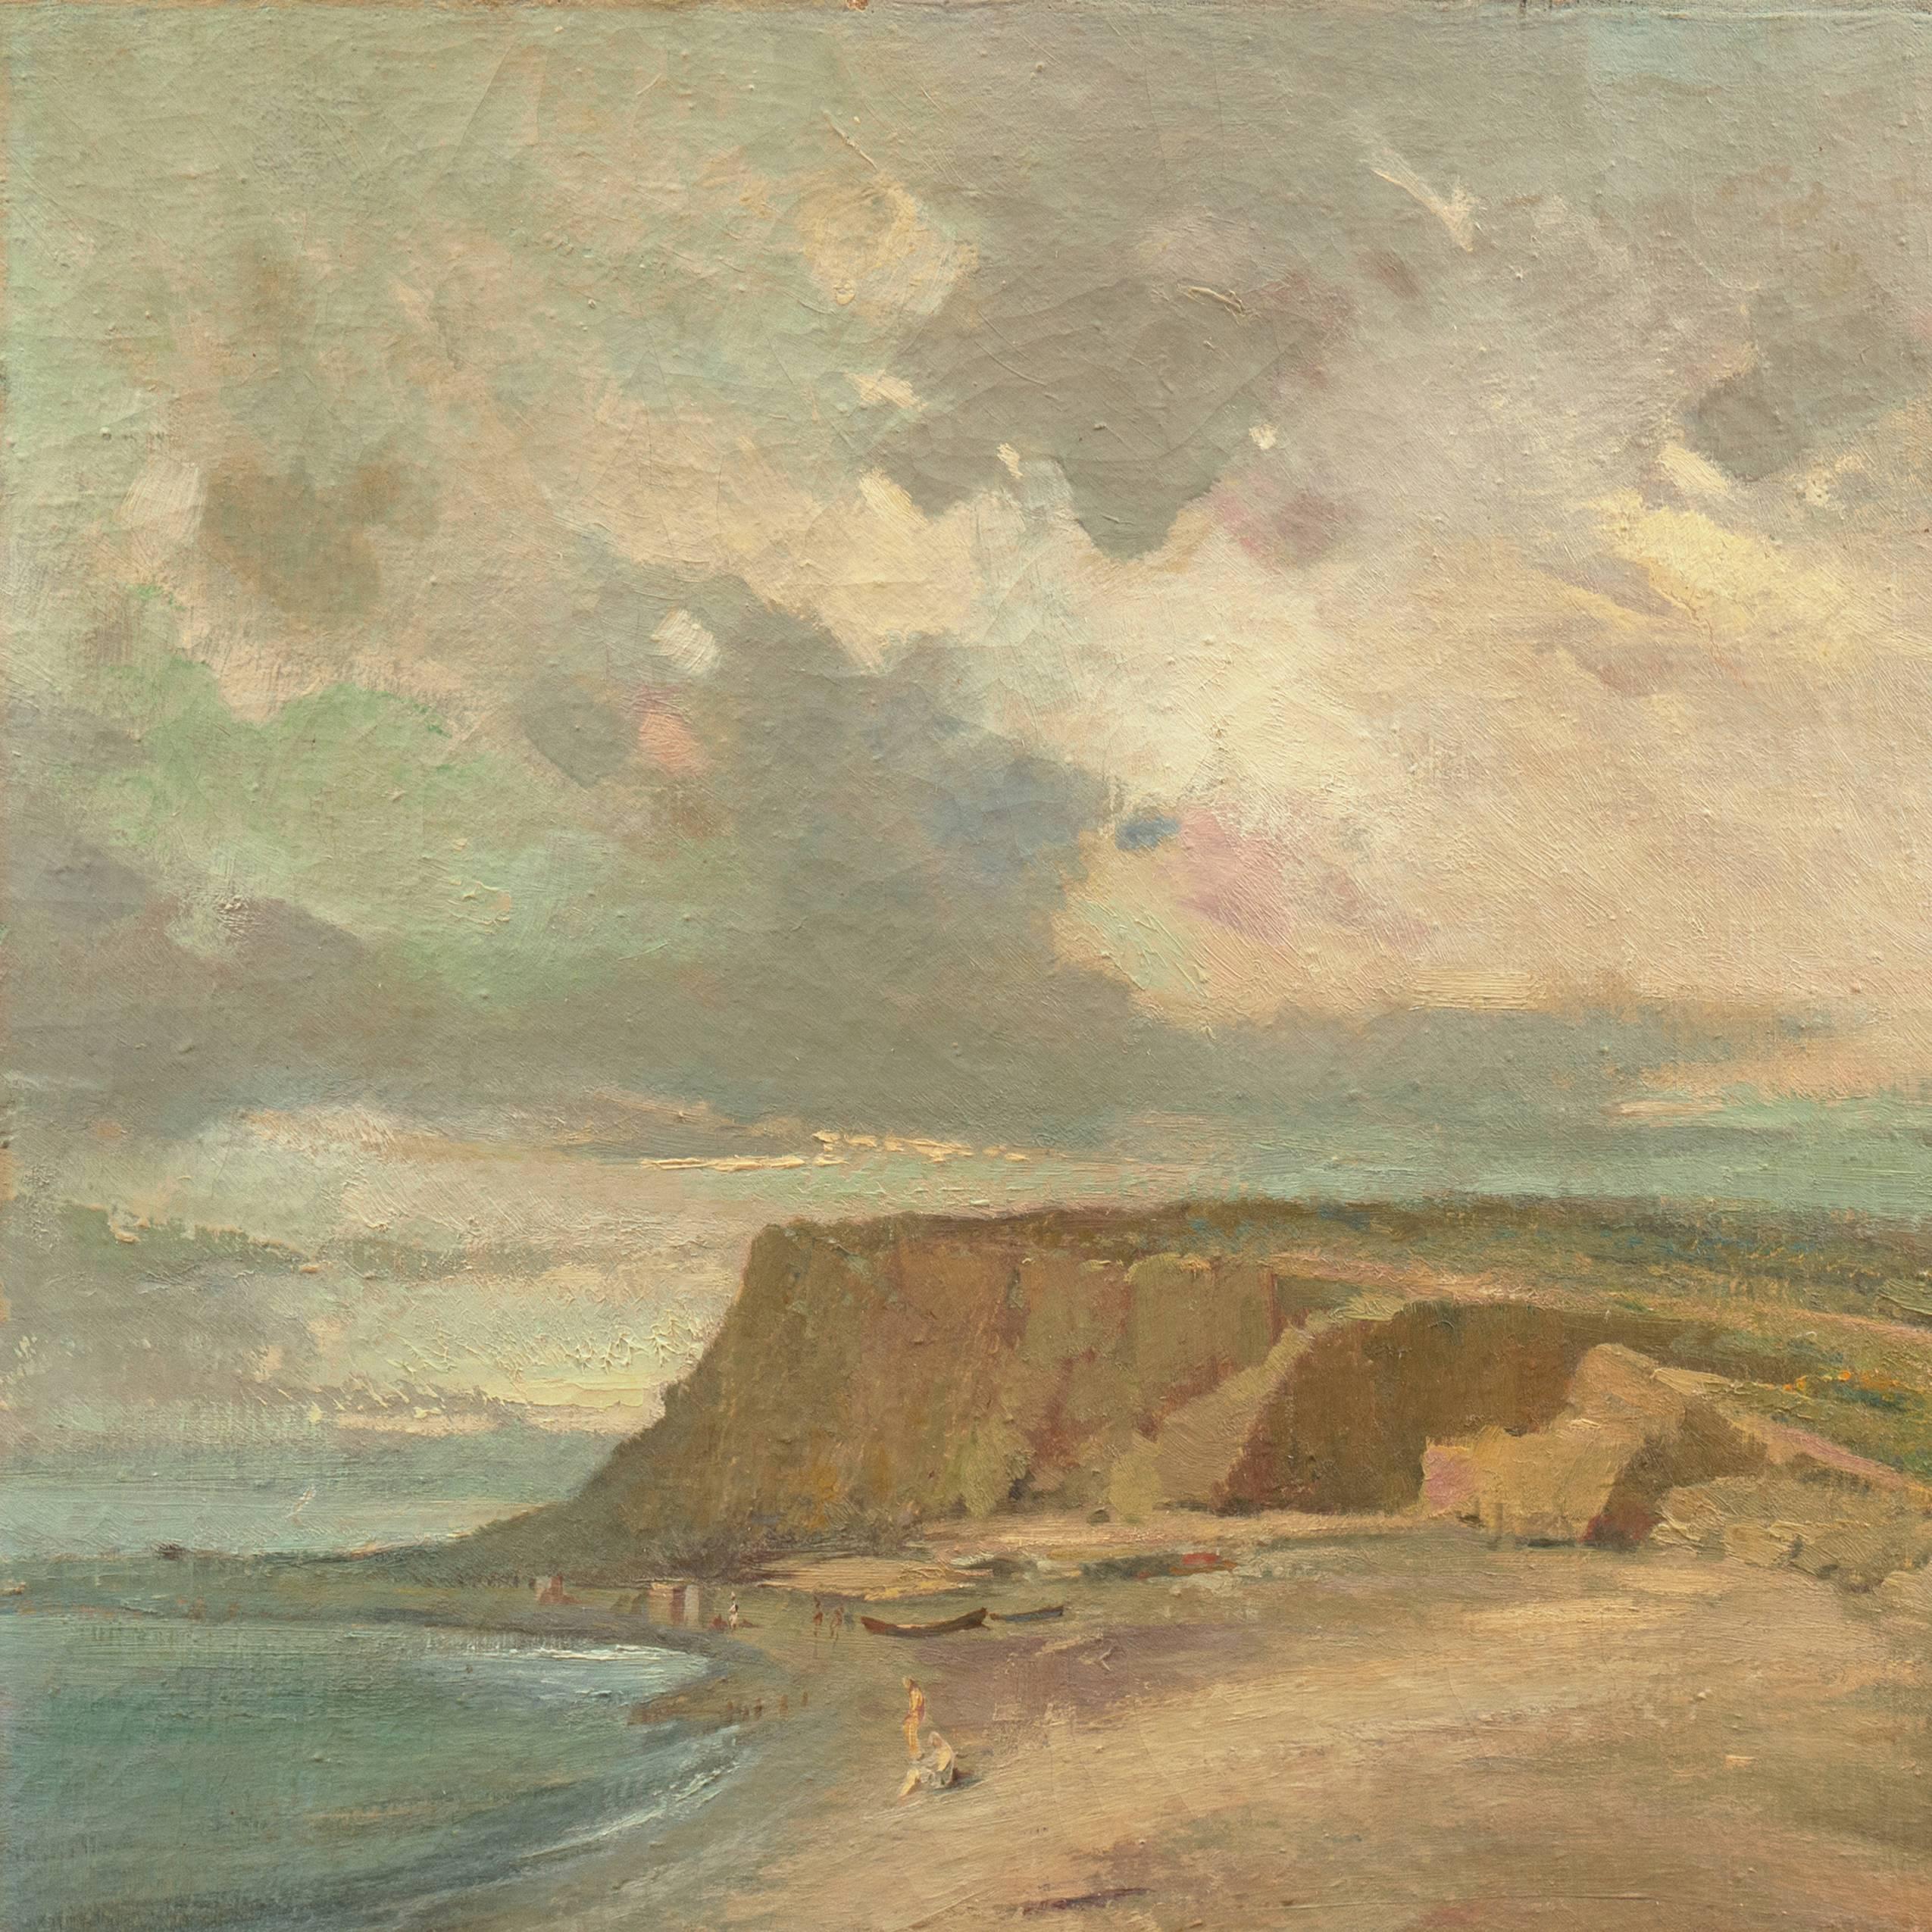 Signed lower right, 'F. Ferraro', titled indistinctly and painted circa 1925.

A panoramic coastal landscape showing a view of figures on a sandy beach with a cottage tucked into the lee of a hill. An elegant and painterly treatment with deft